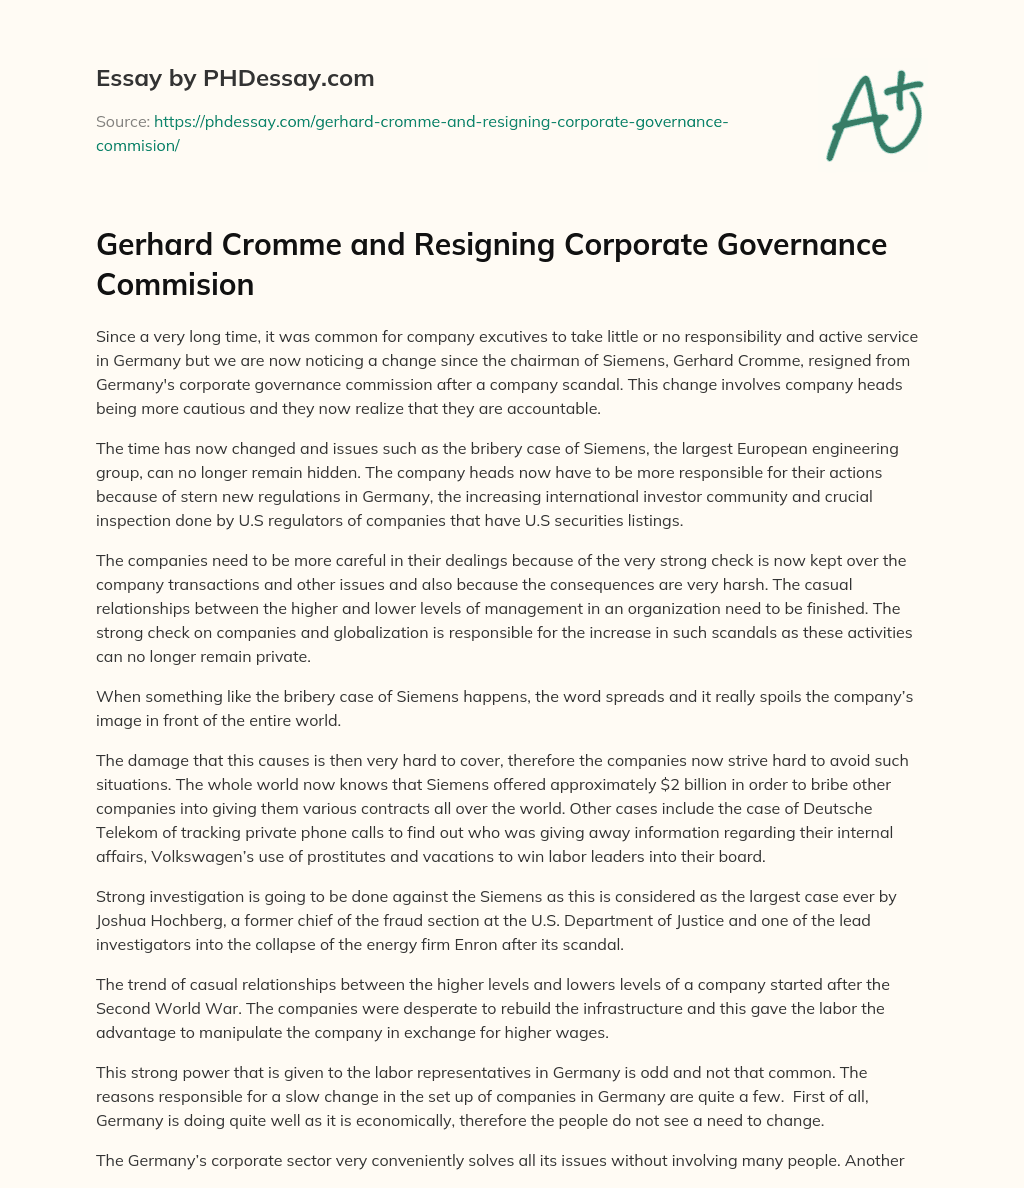 Gerhard Cromme and Resigning  Corporate Governance Commision essay